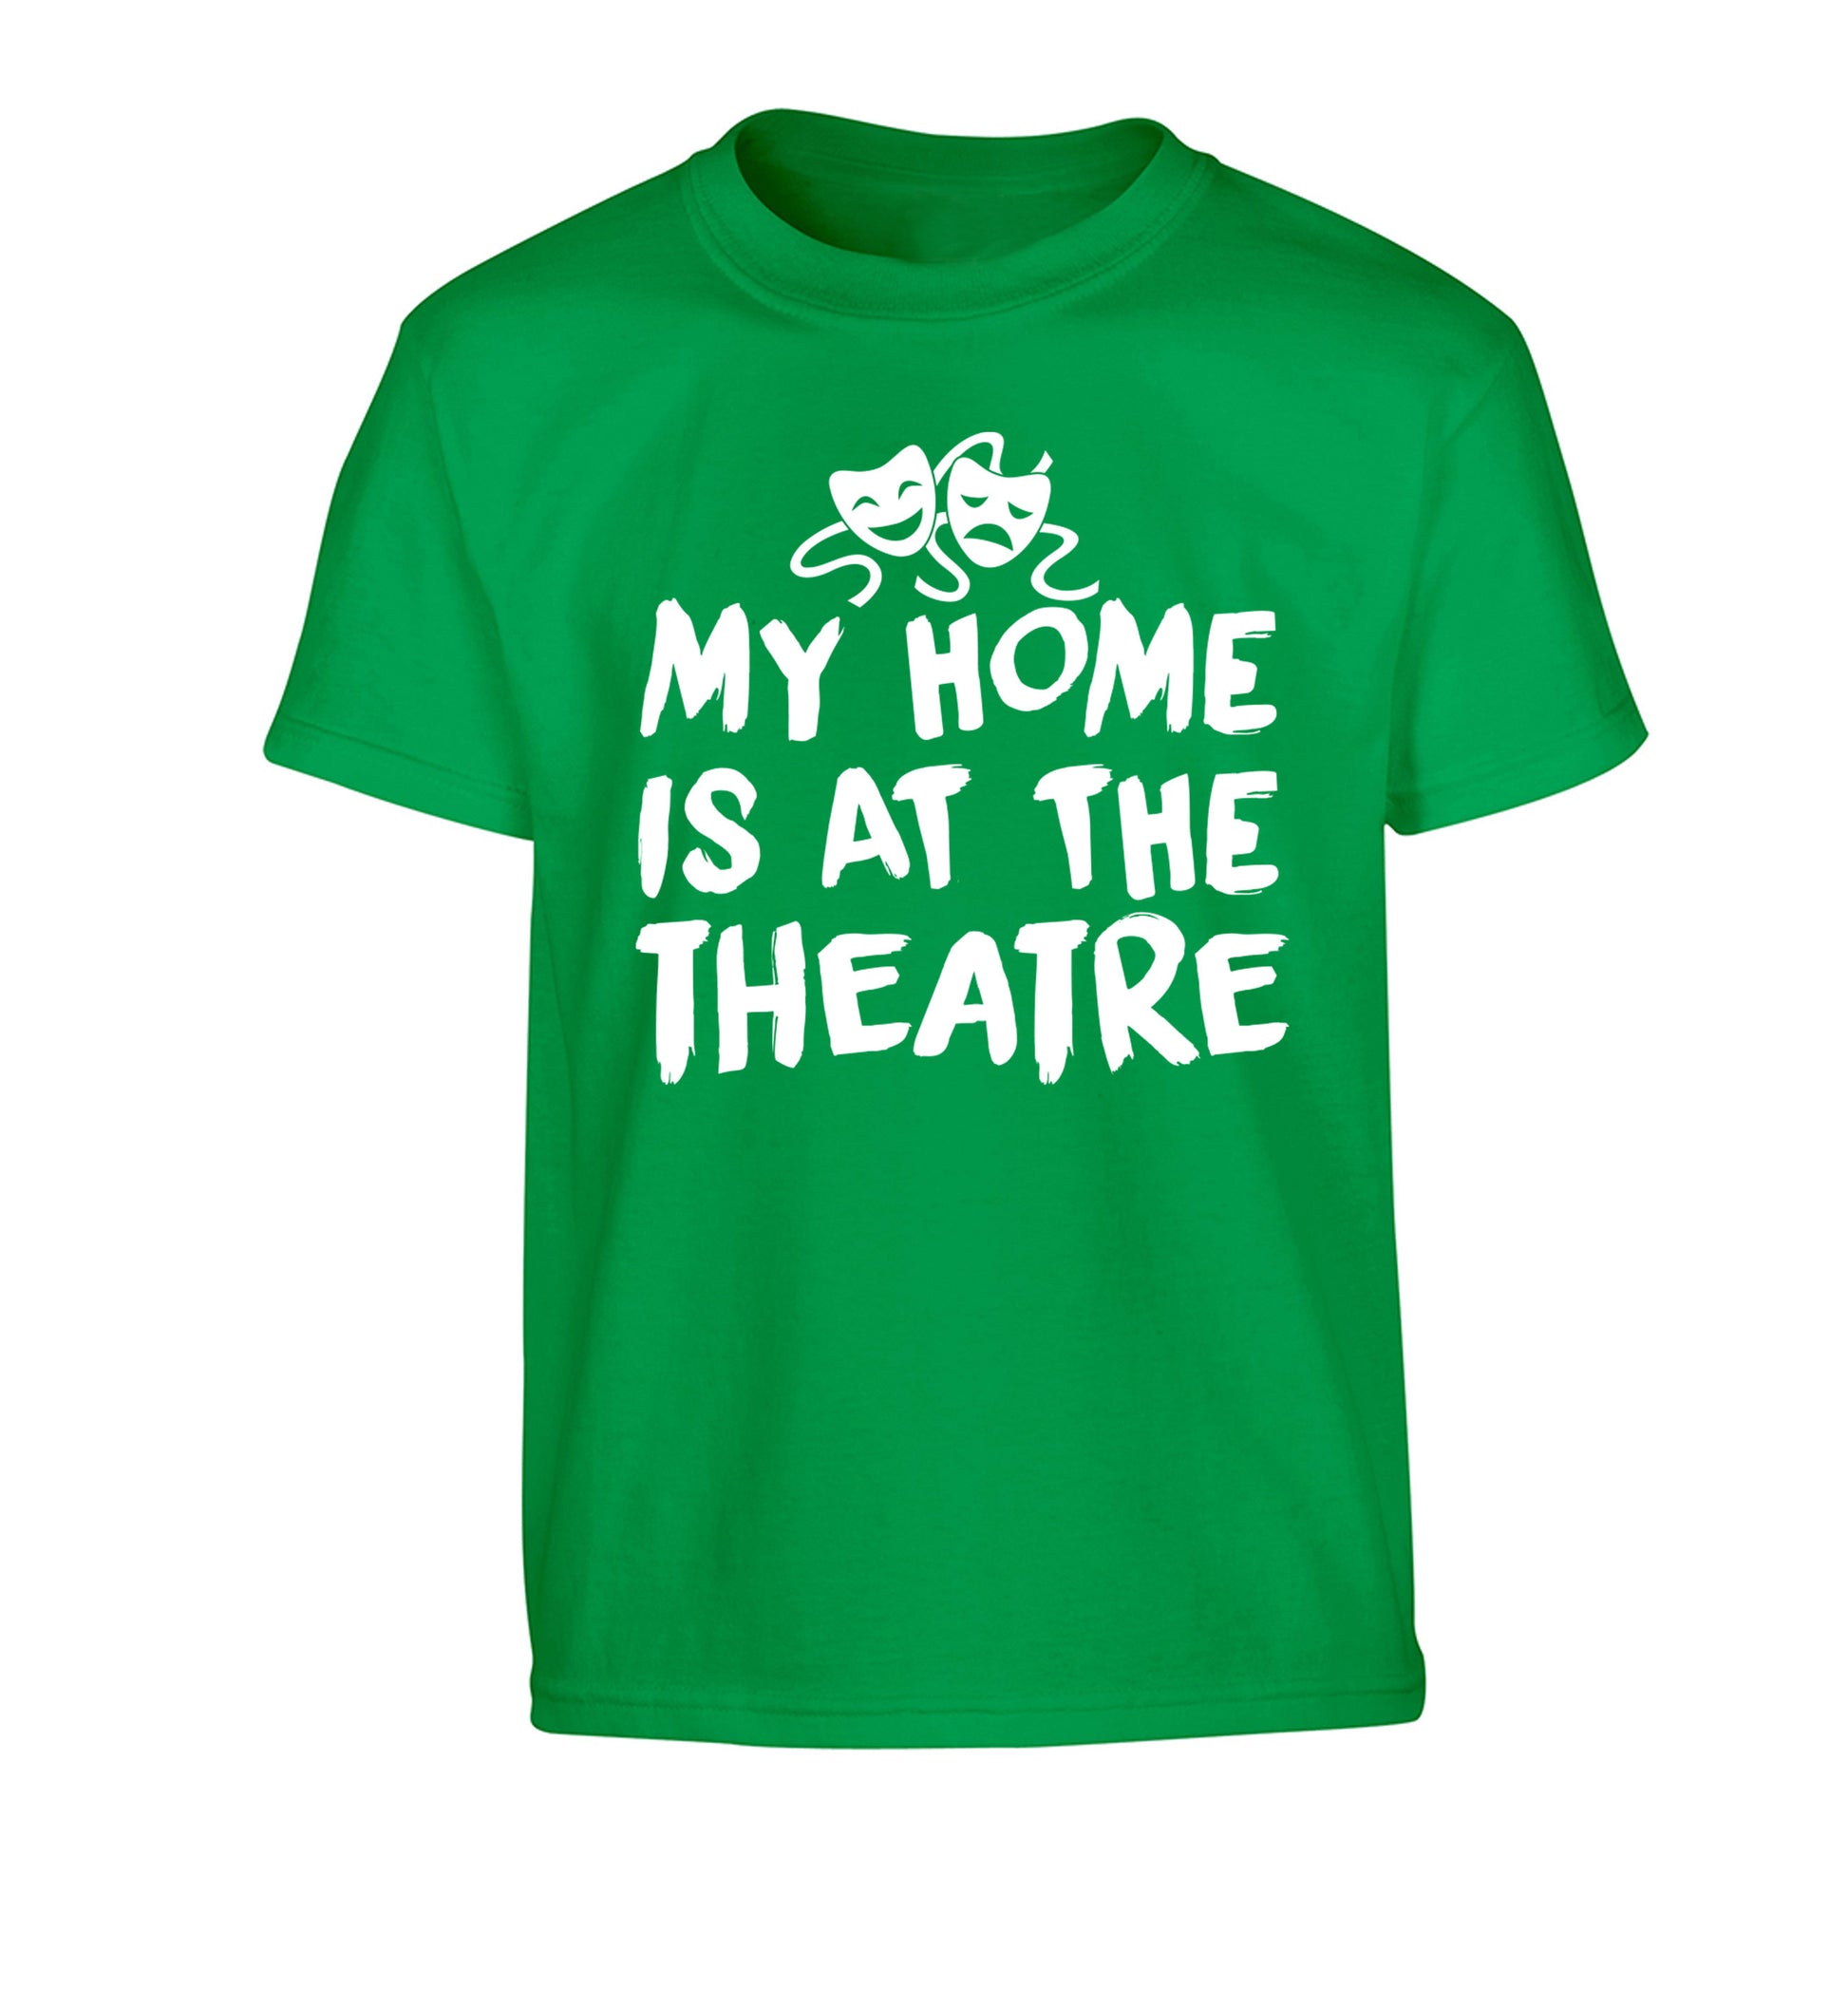 My home is at the theatre Children's green Tshirt 12-14 Years